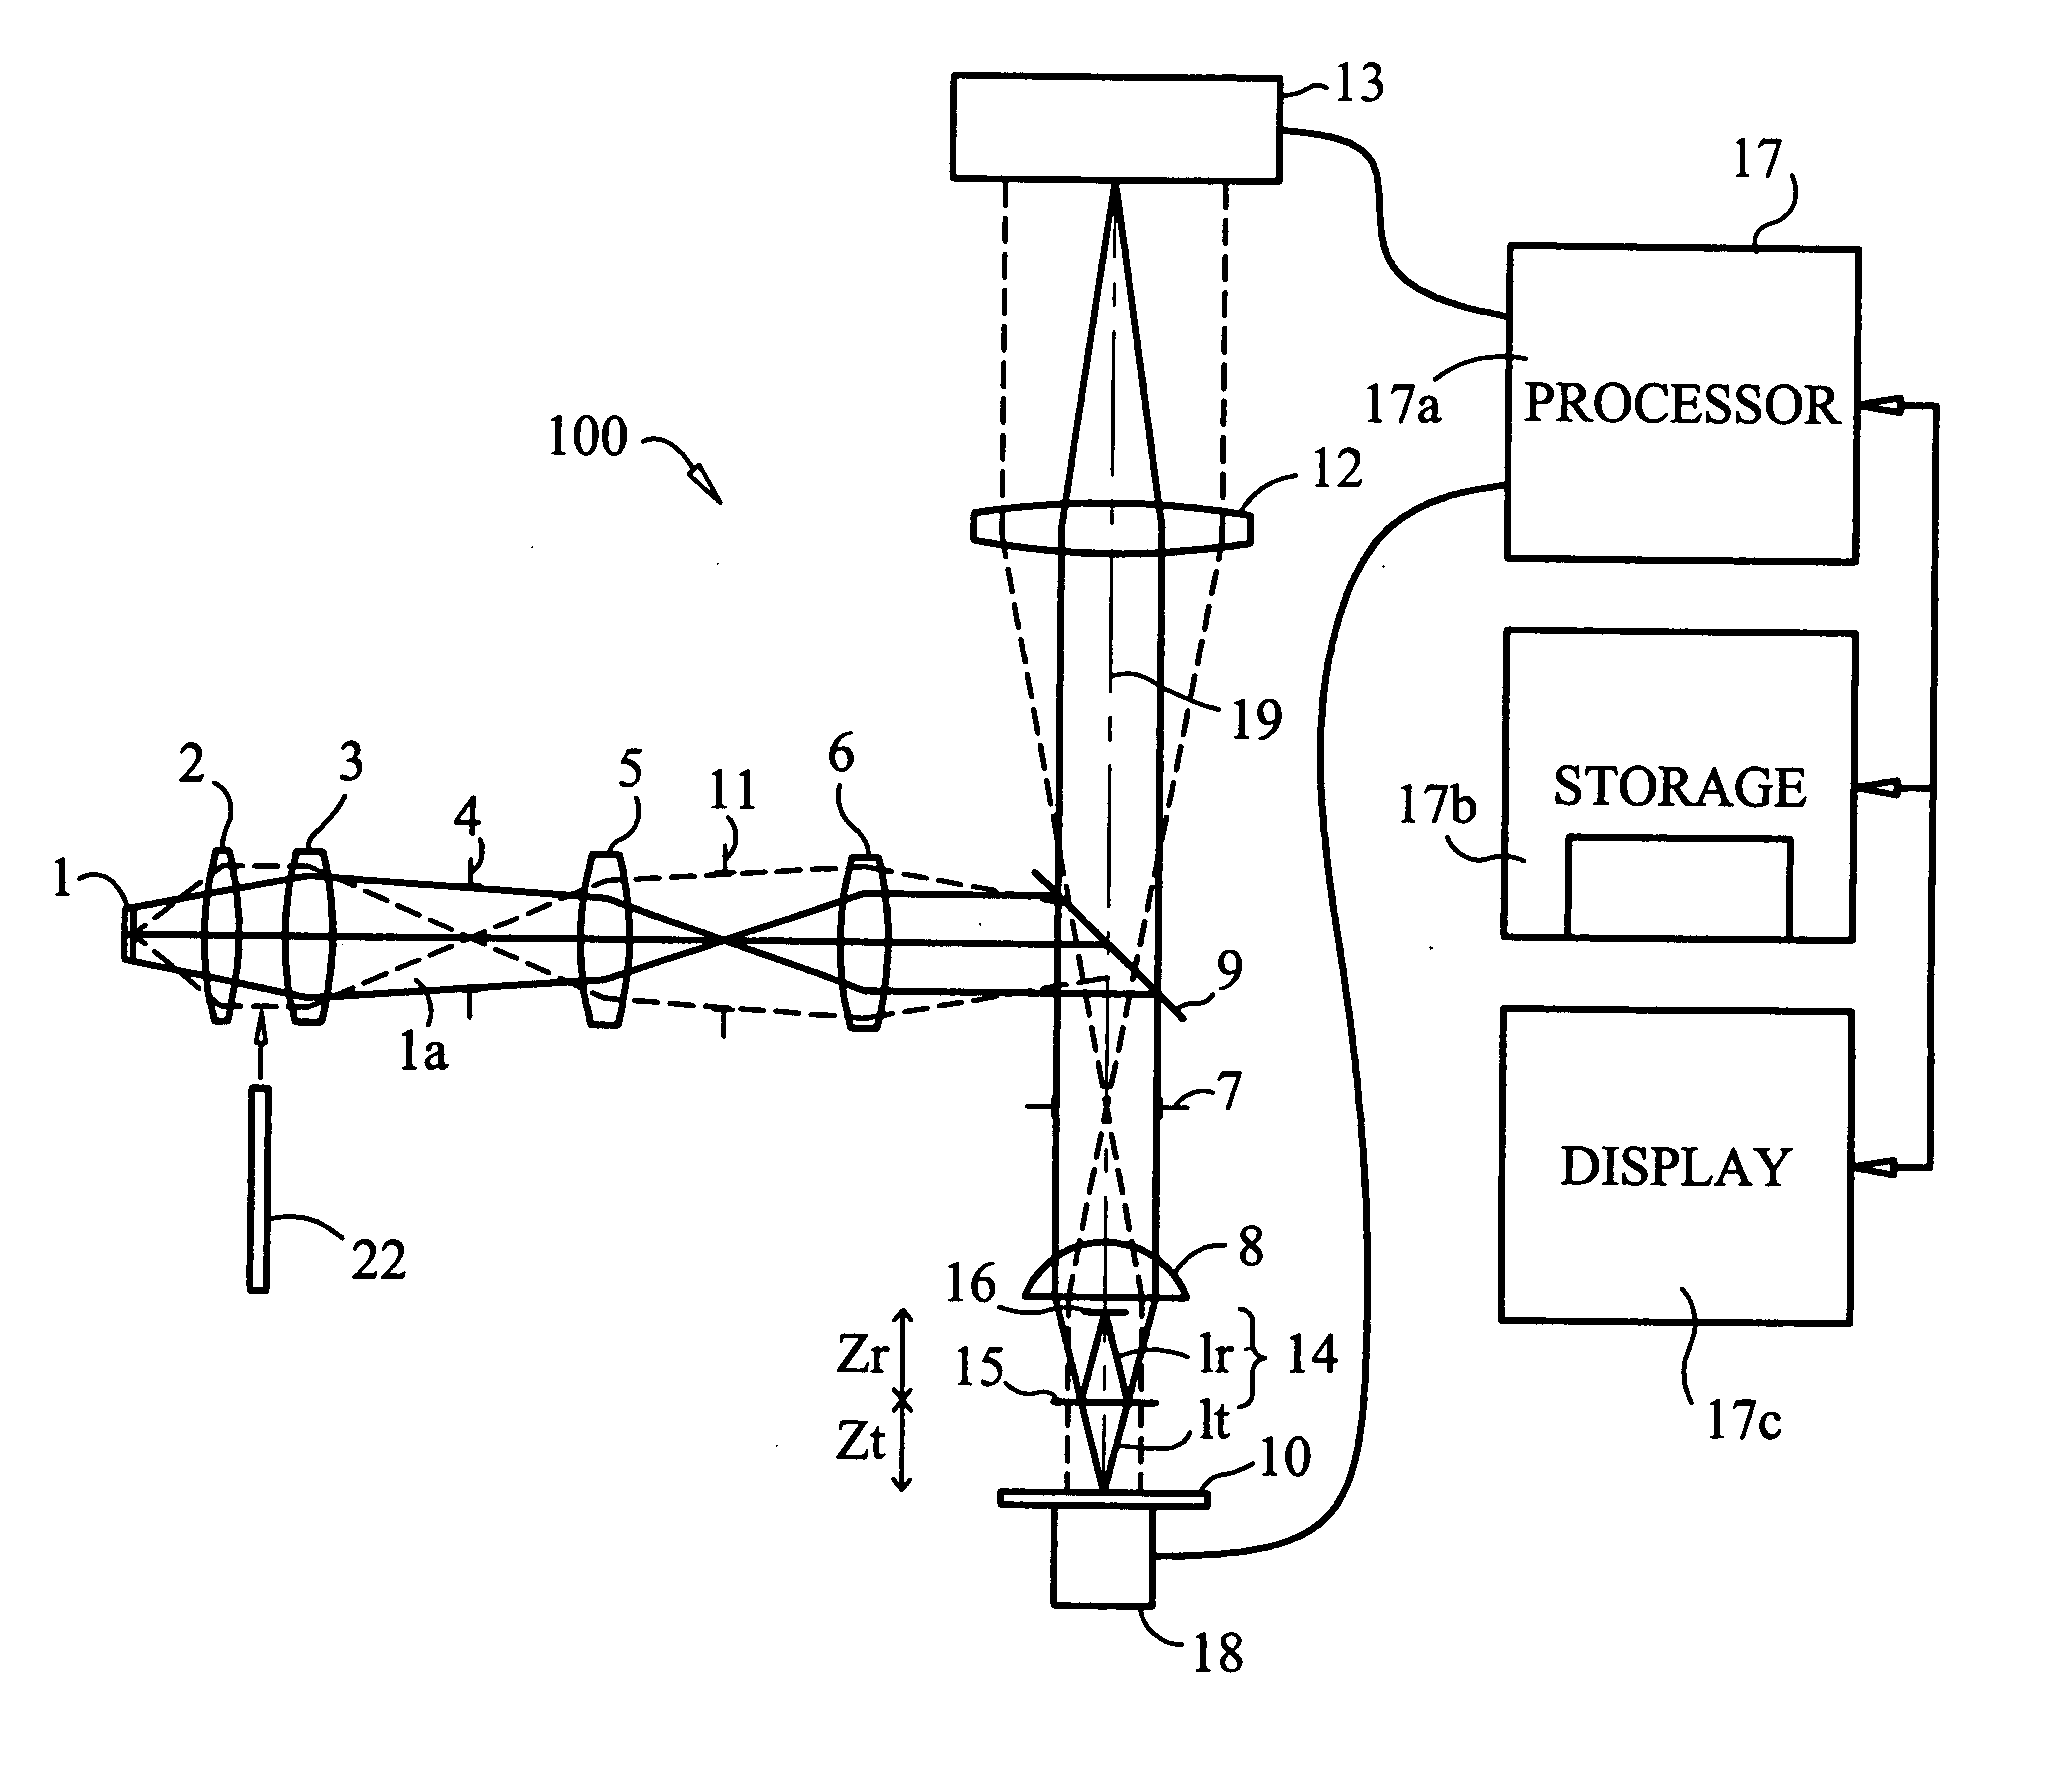 Method & apparatus for optically analyzing a surface